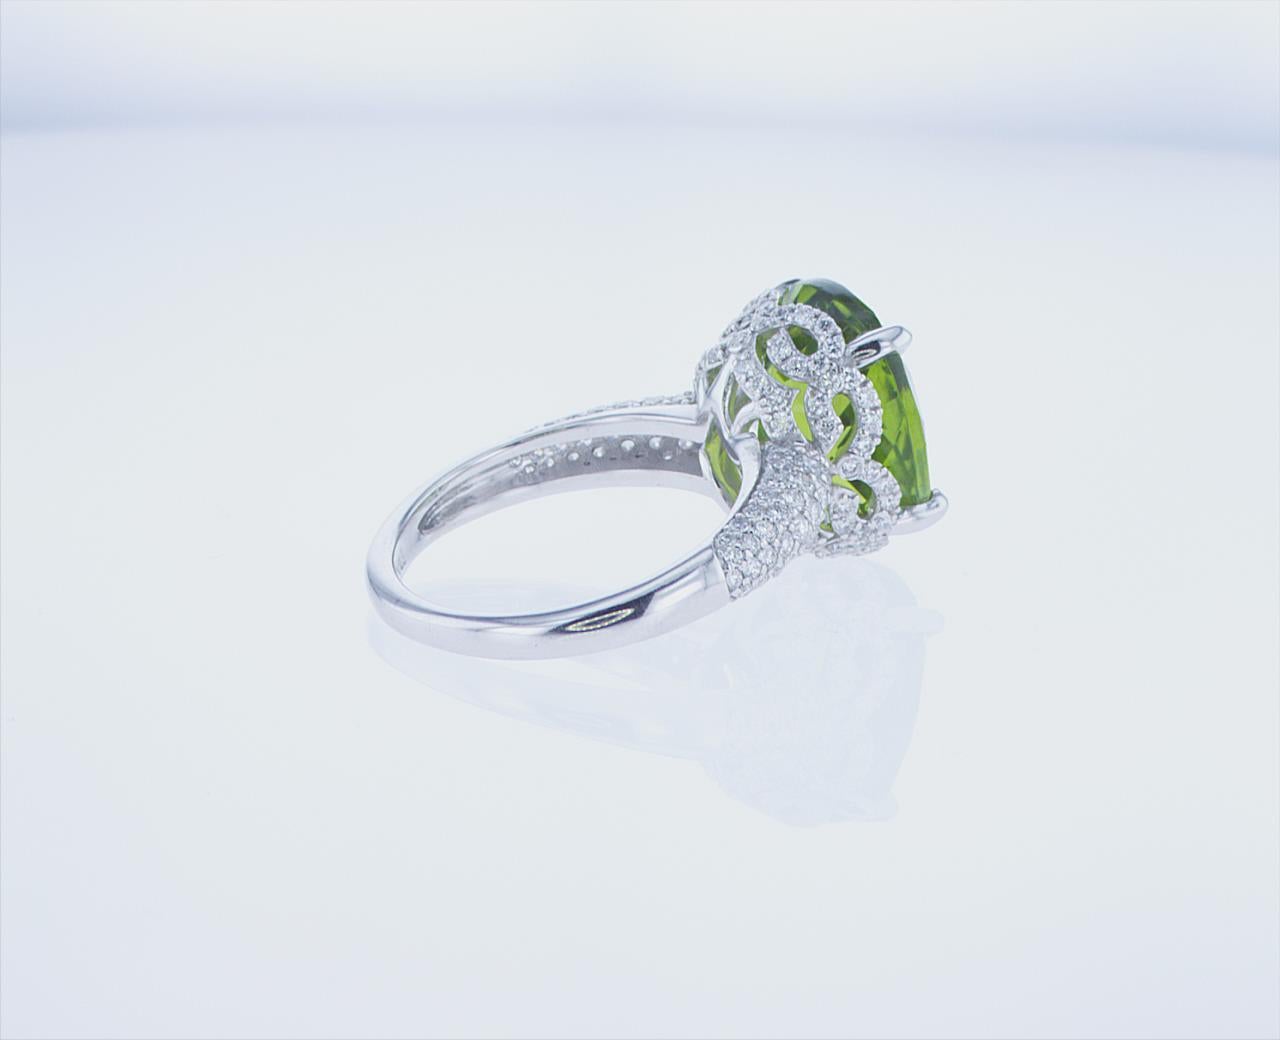 7.93 Carat Oval Peridot Cocktail Ring in 18k White Gold with Palladium In New Condition For Sale In New York, NY